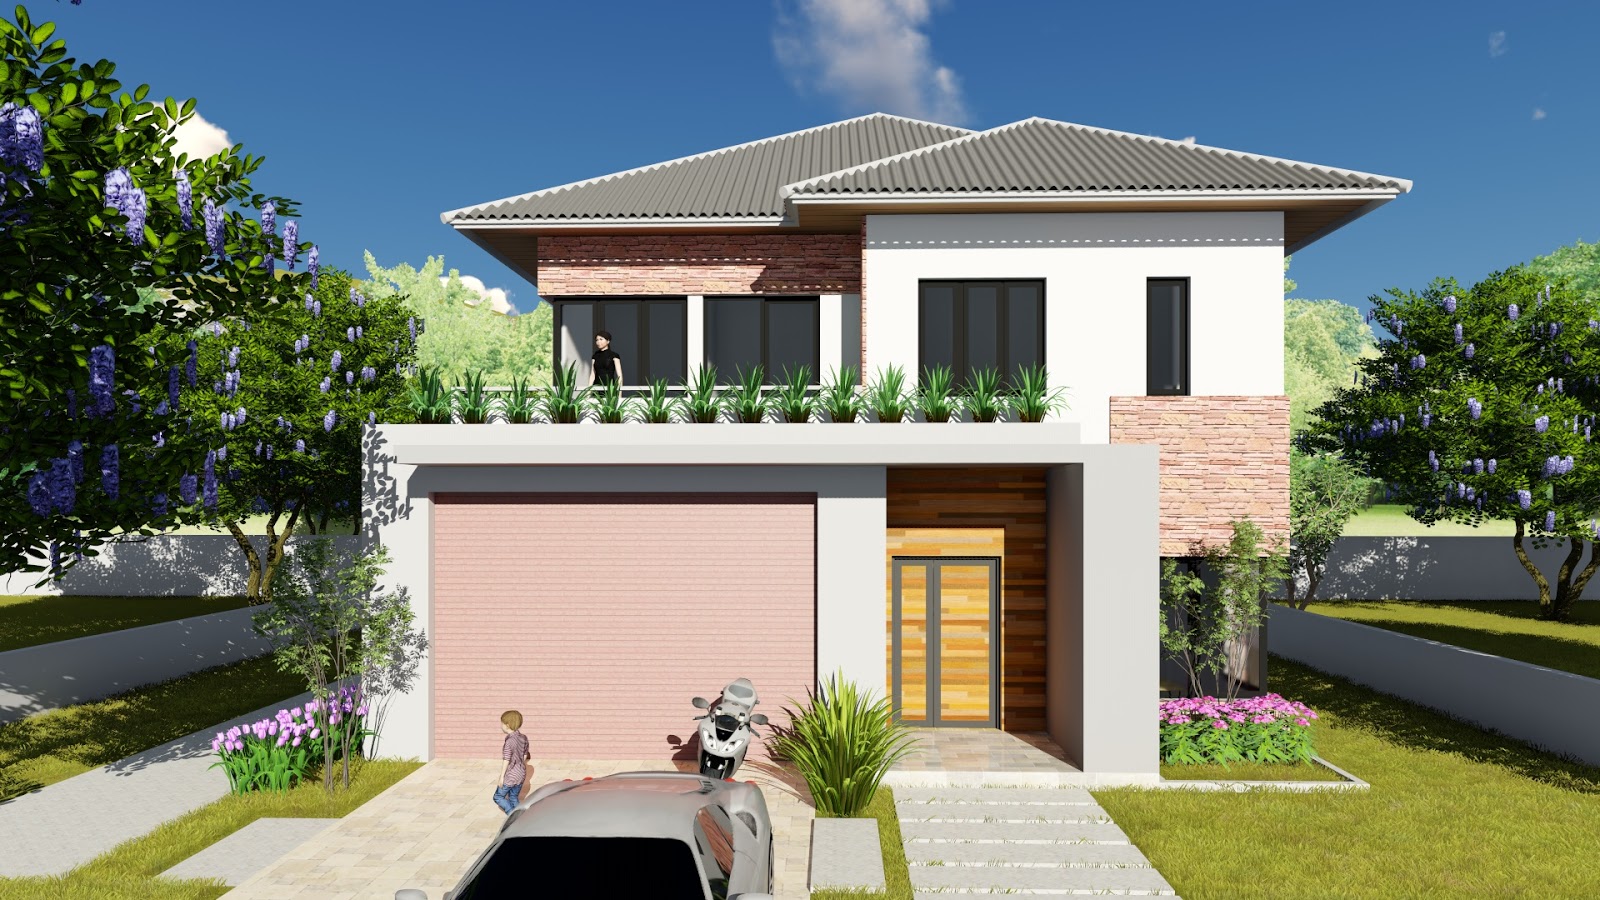  Sketchup  Villa Design  11x13m Two Stories House  with 3 